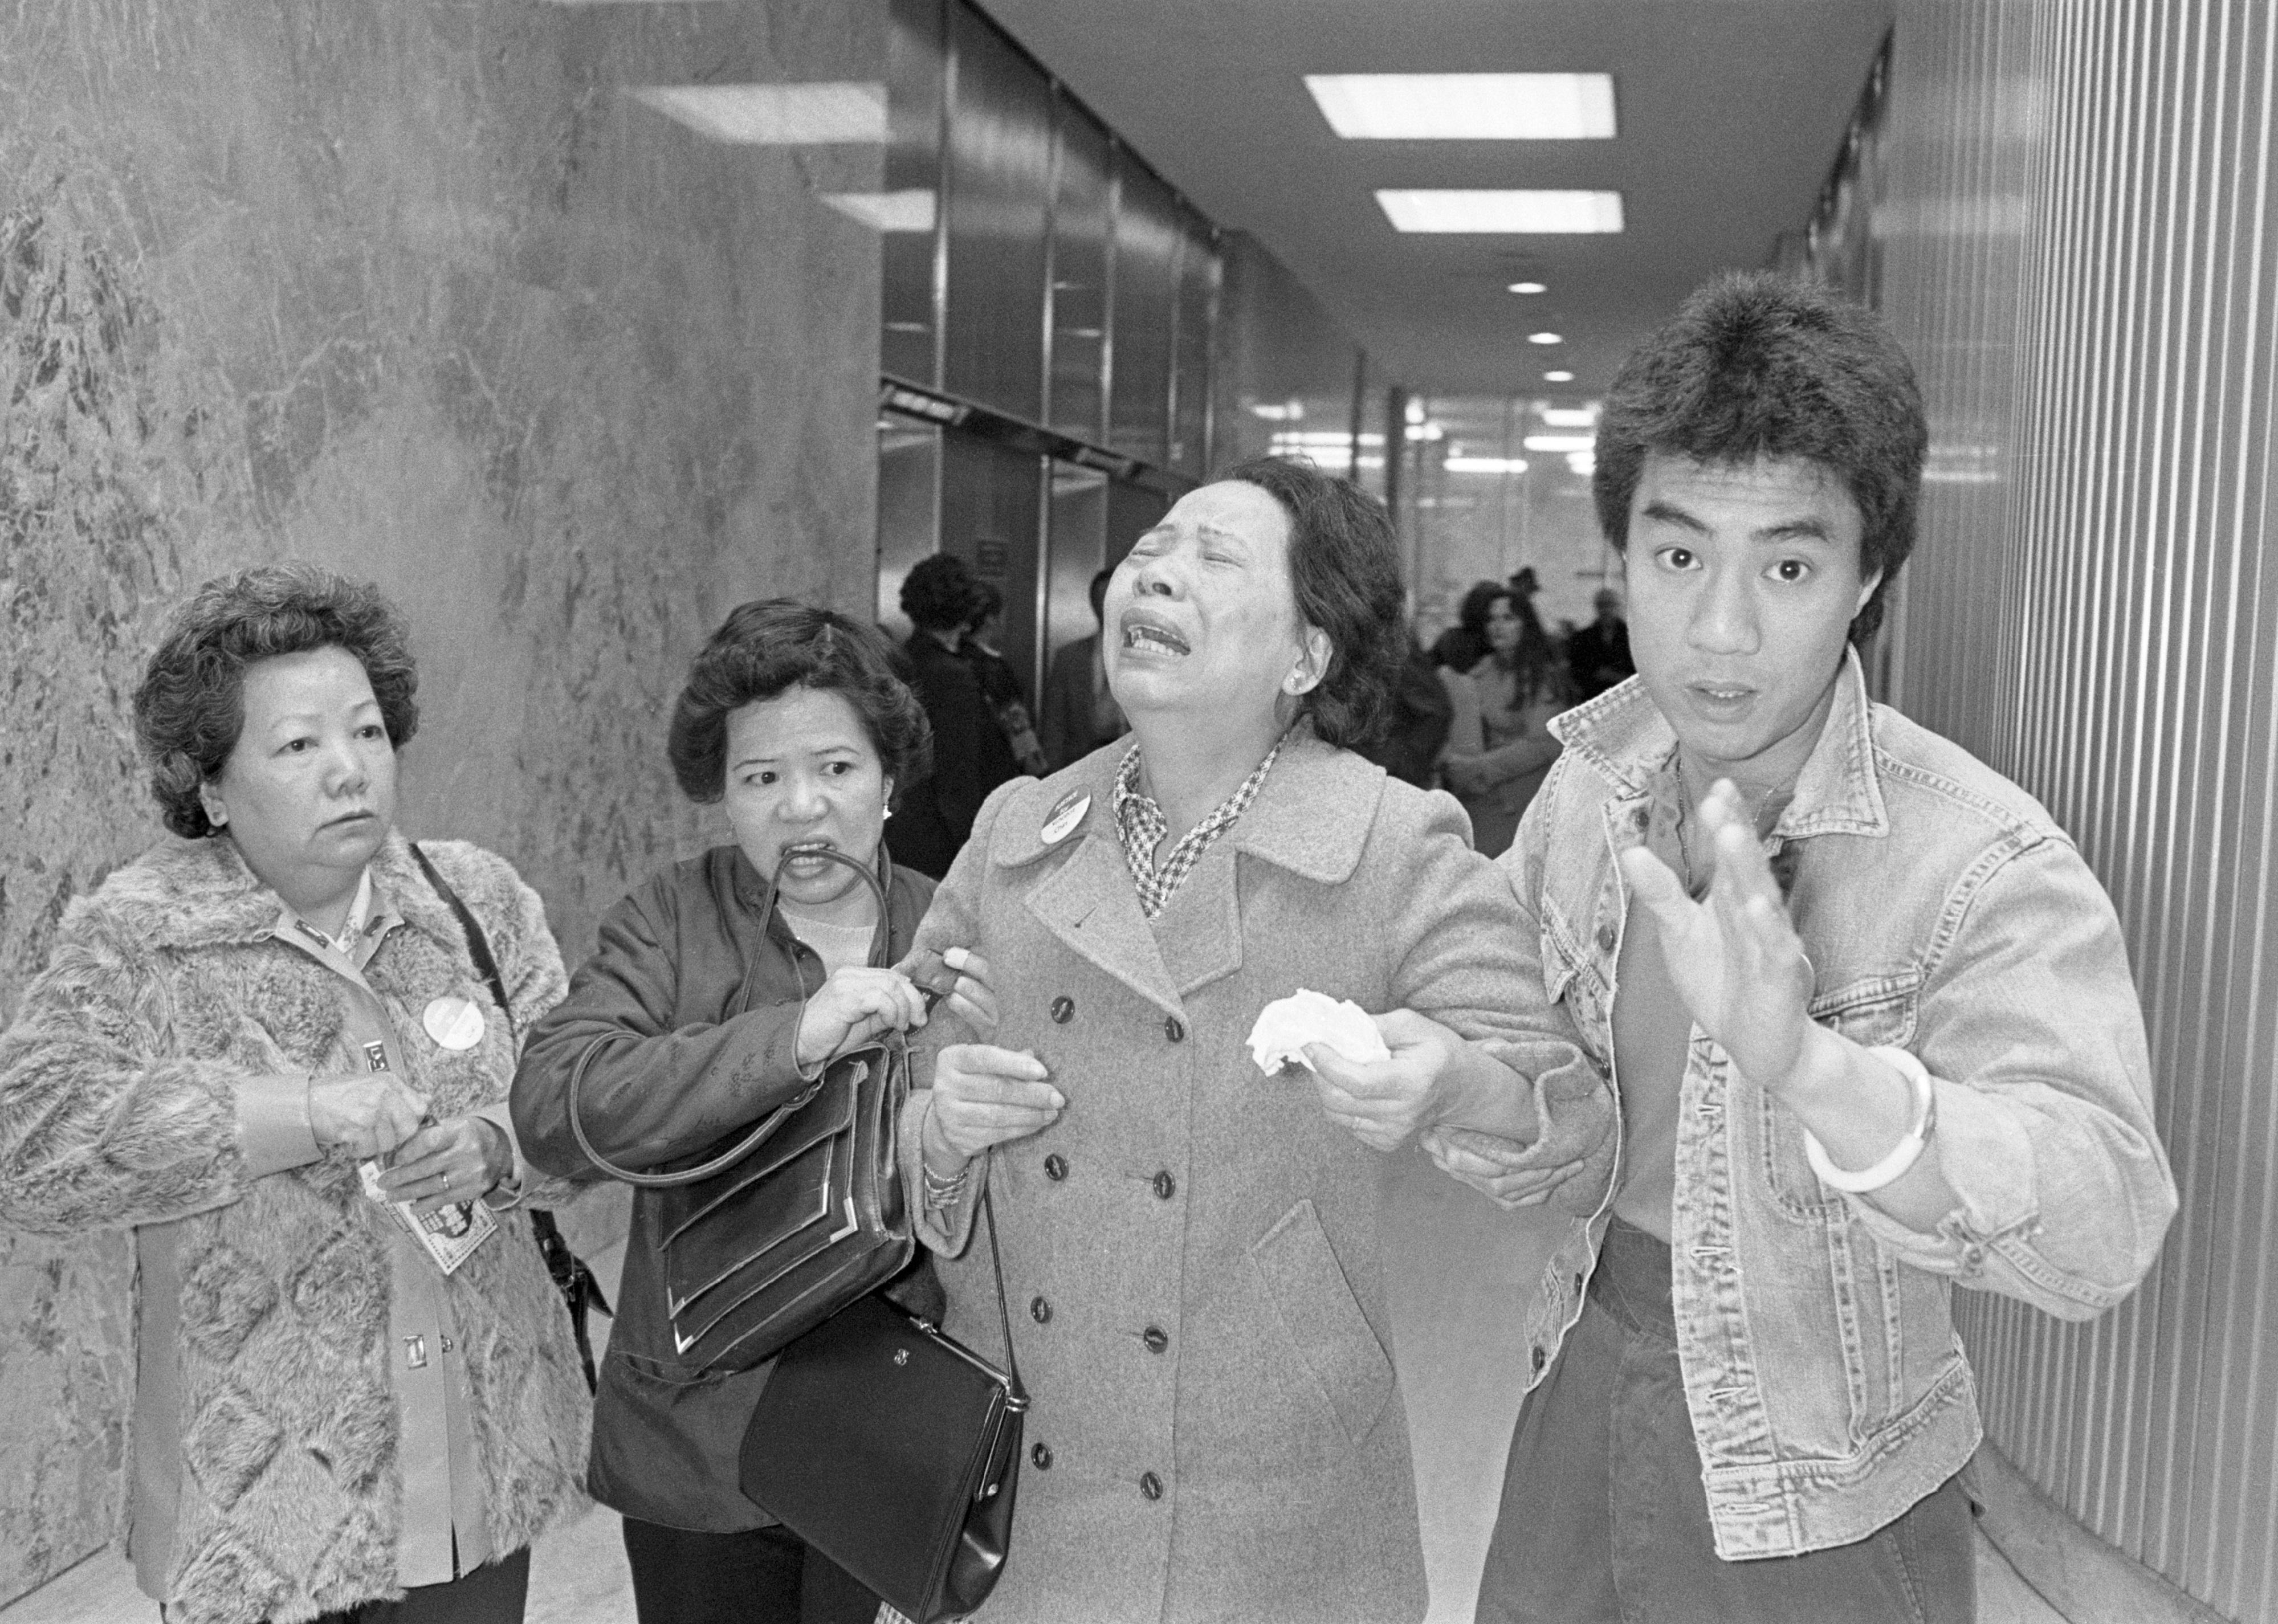 Lillie Chin, mother of Vincent Chin breaks down as a relative helps her walk while leaving Detroit's City County Building. 